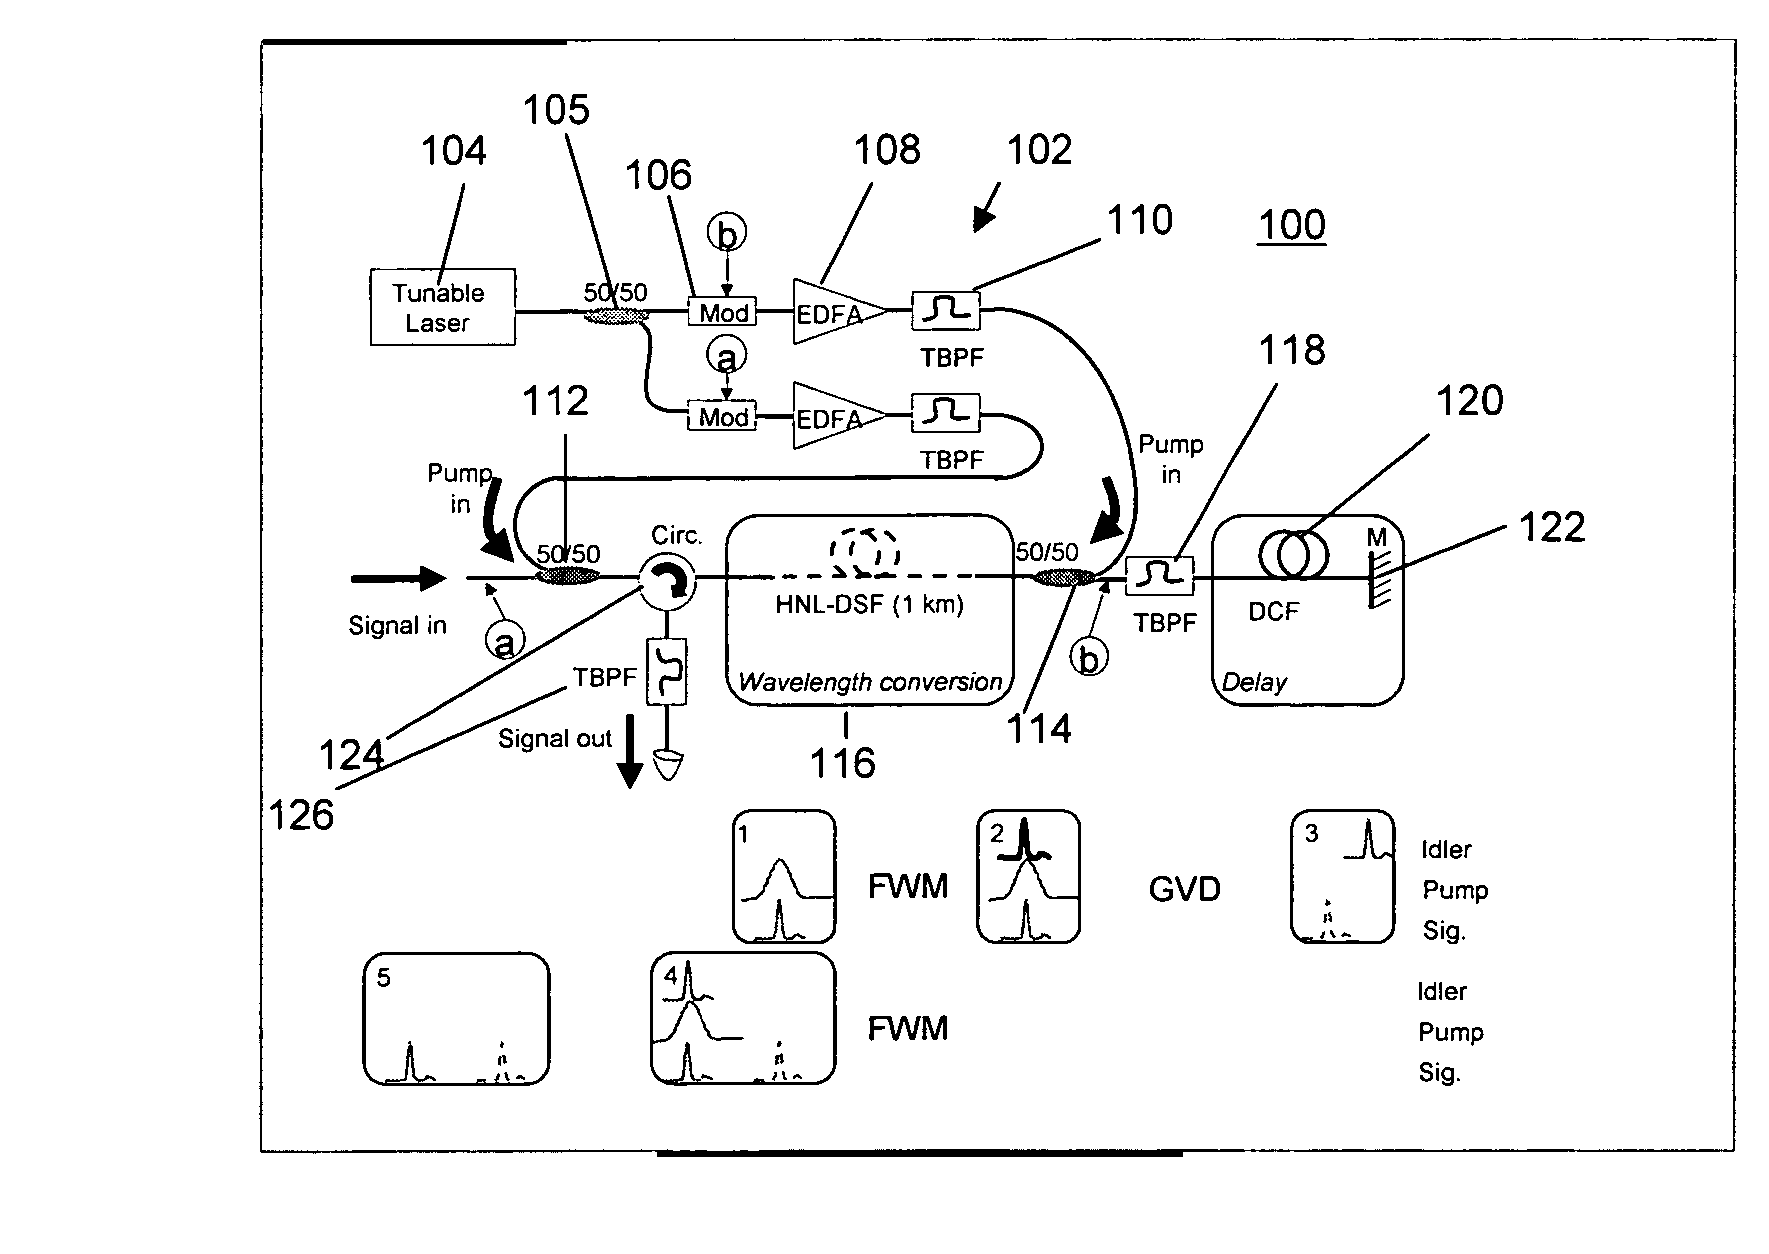 All-optical, continuously tunable, pulse delay generator using wavelength conversion and dispersion